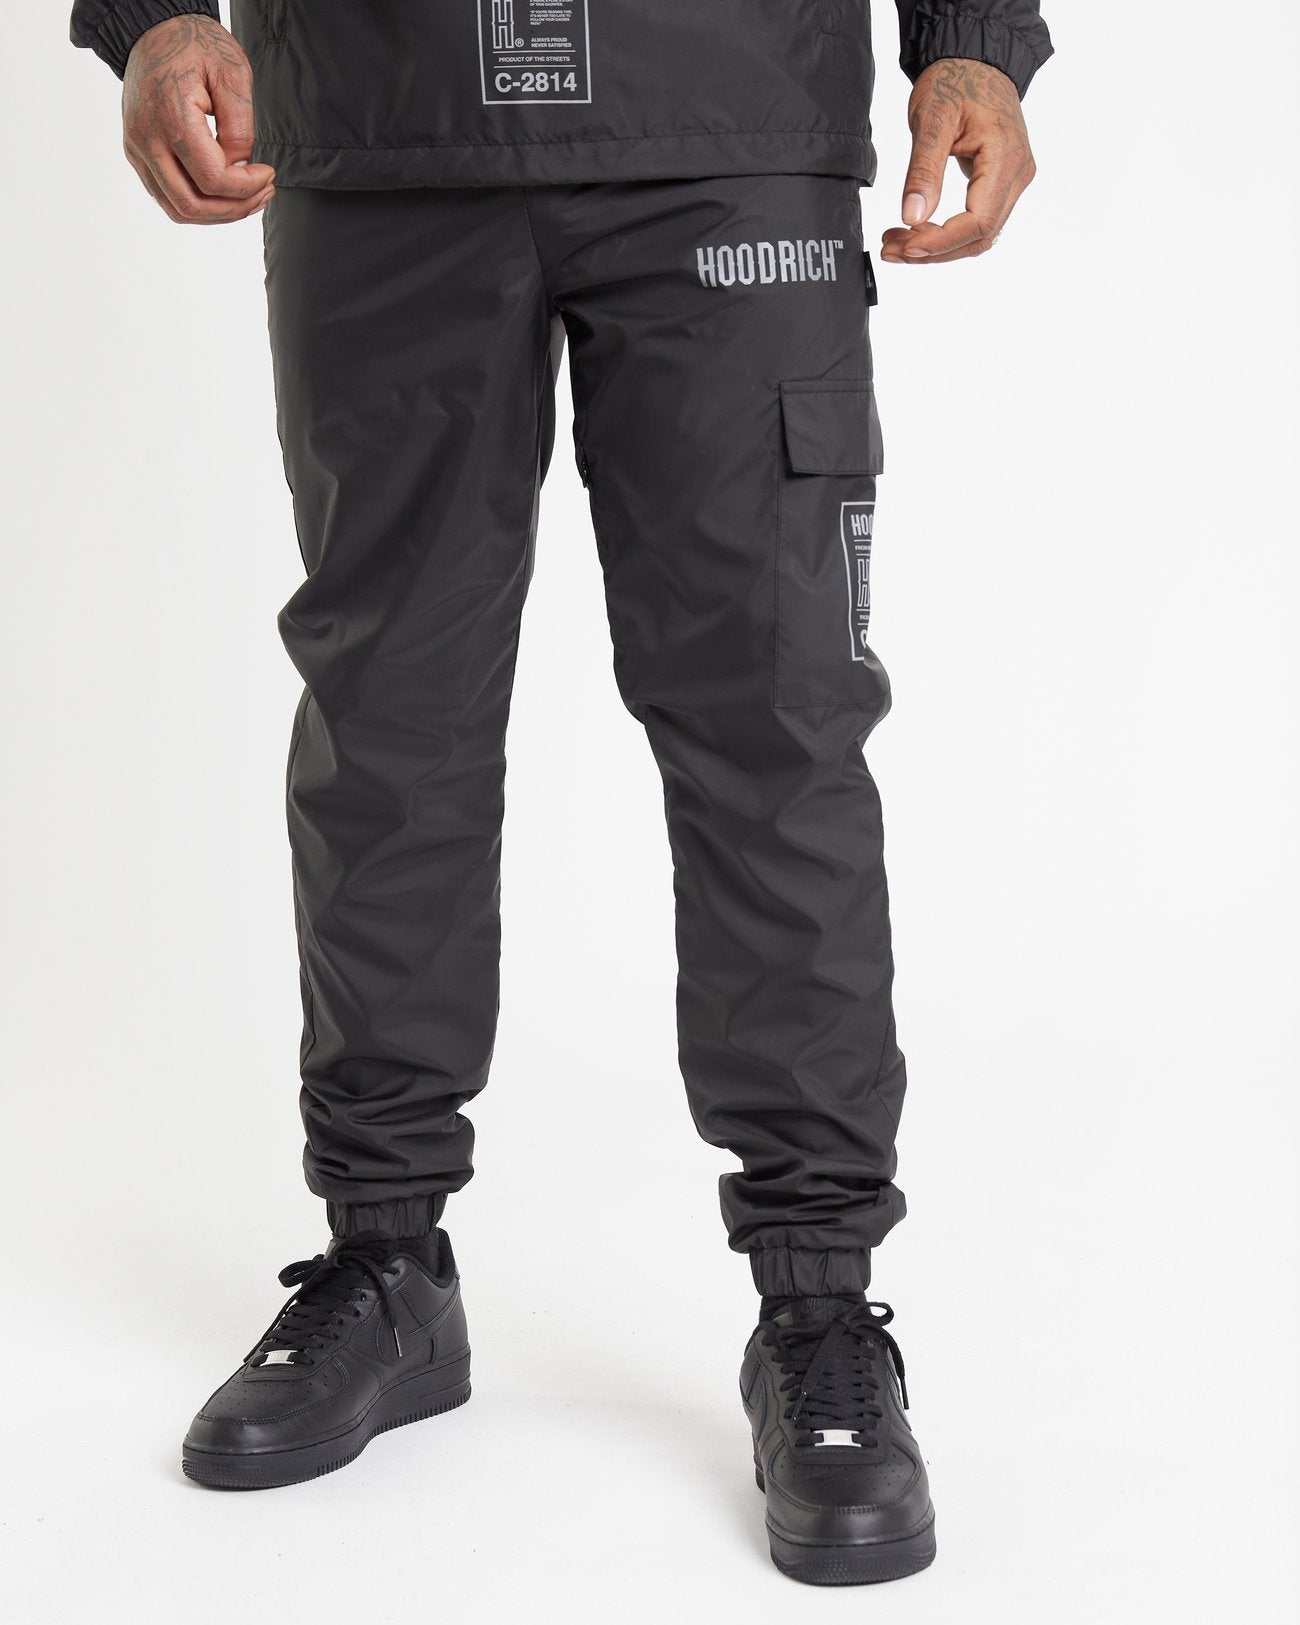 Hassle Free Woven Pant